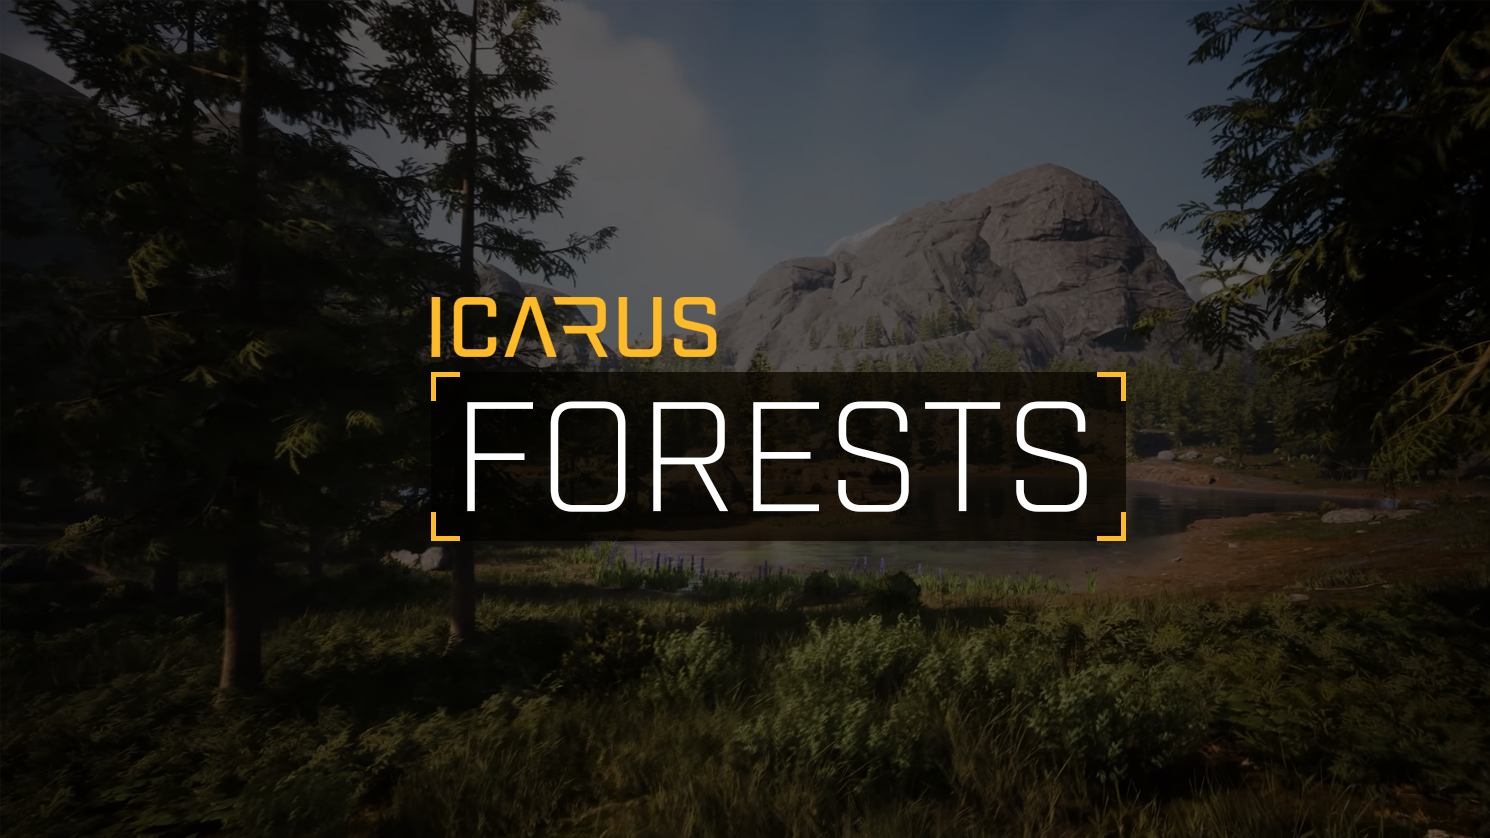 icarus forests featured image